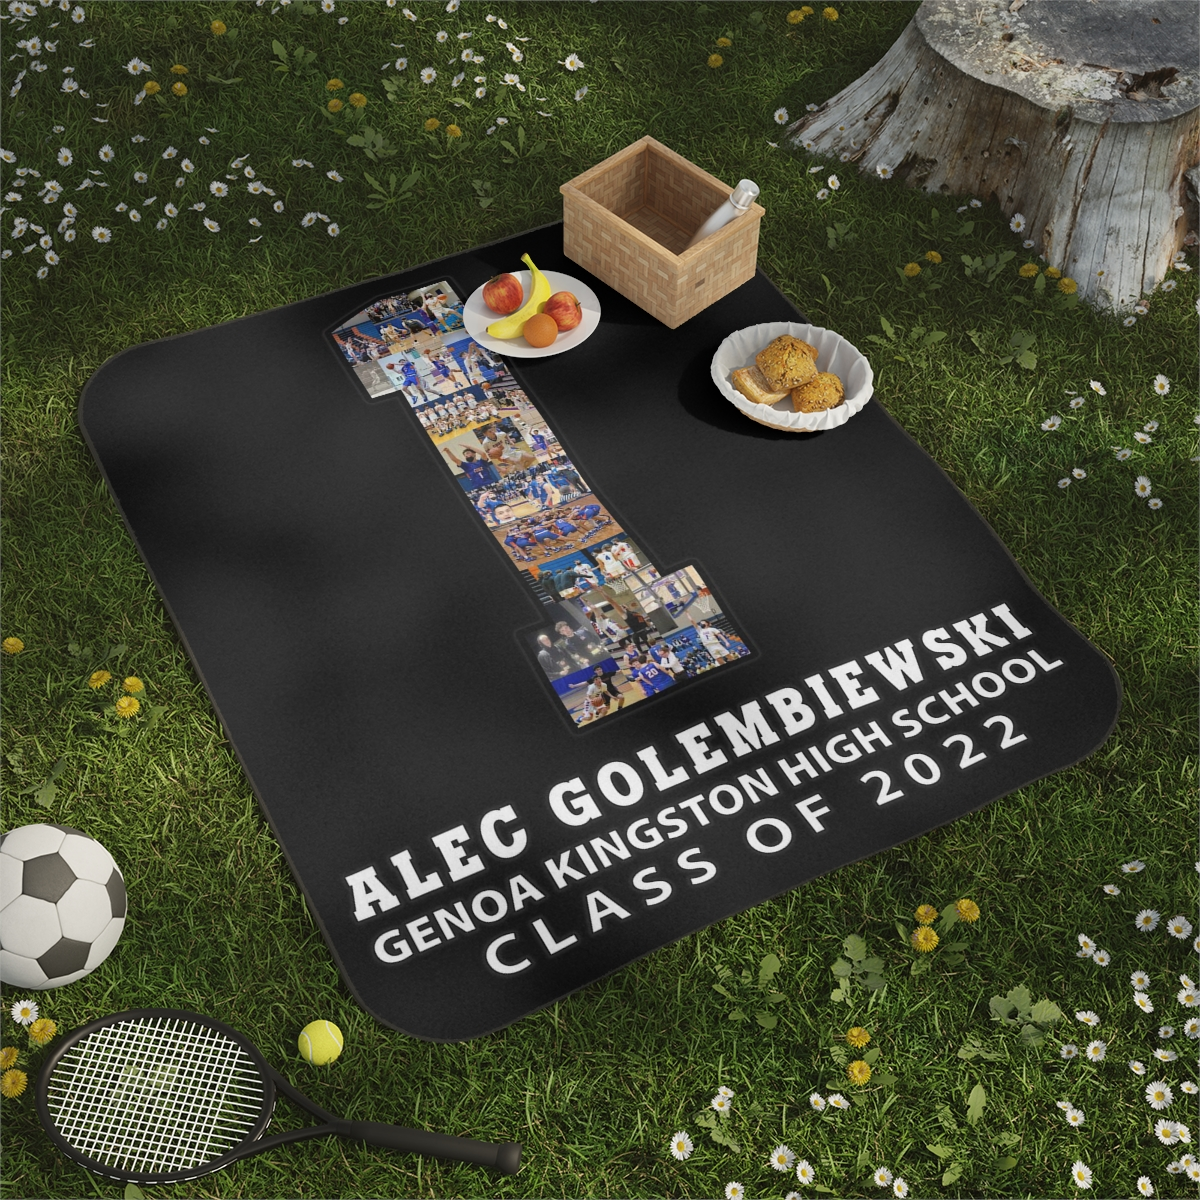 Making a custom photo blanket for your senior night is a great gift. Pictured is a jersey number collage on a fleece photo blanket.